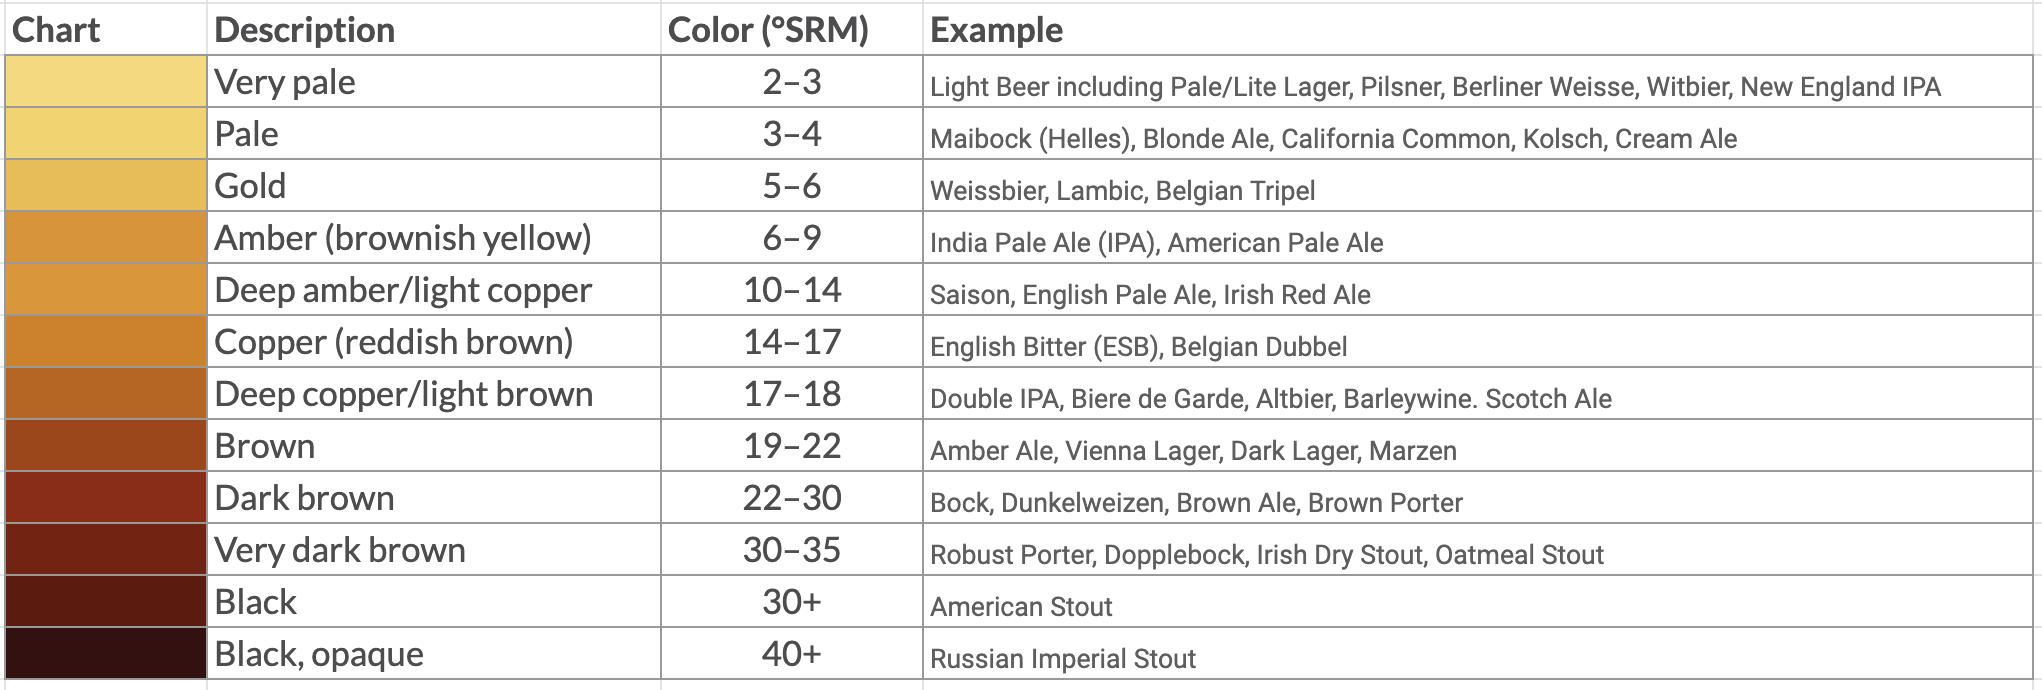 Whether you call it Beer SRM, SRM in beer, or go the long route and refer to it as the "Standard Reference Method," it's an important aspect of beer science that often goes unnoticed by casual drinkers. But what does it actually mean? 